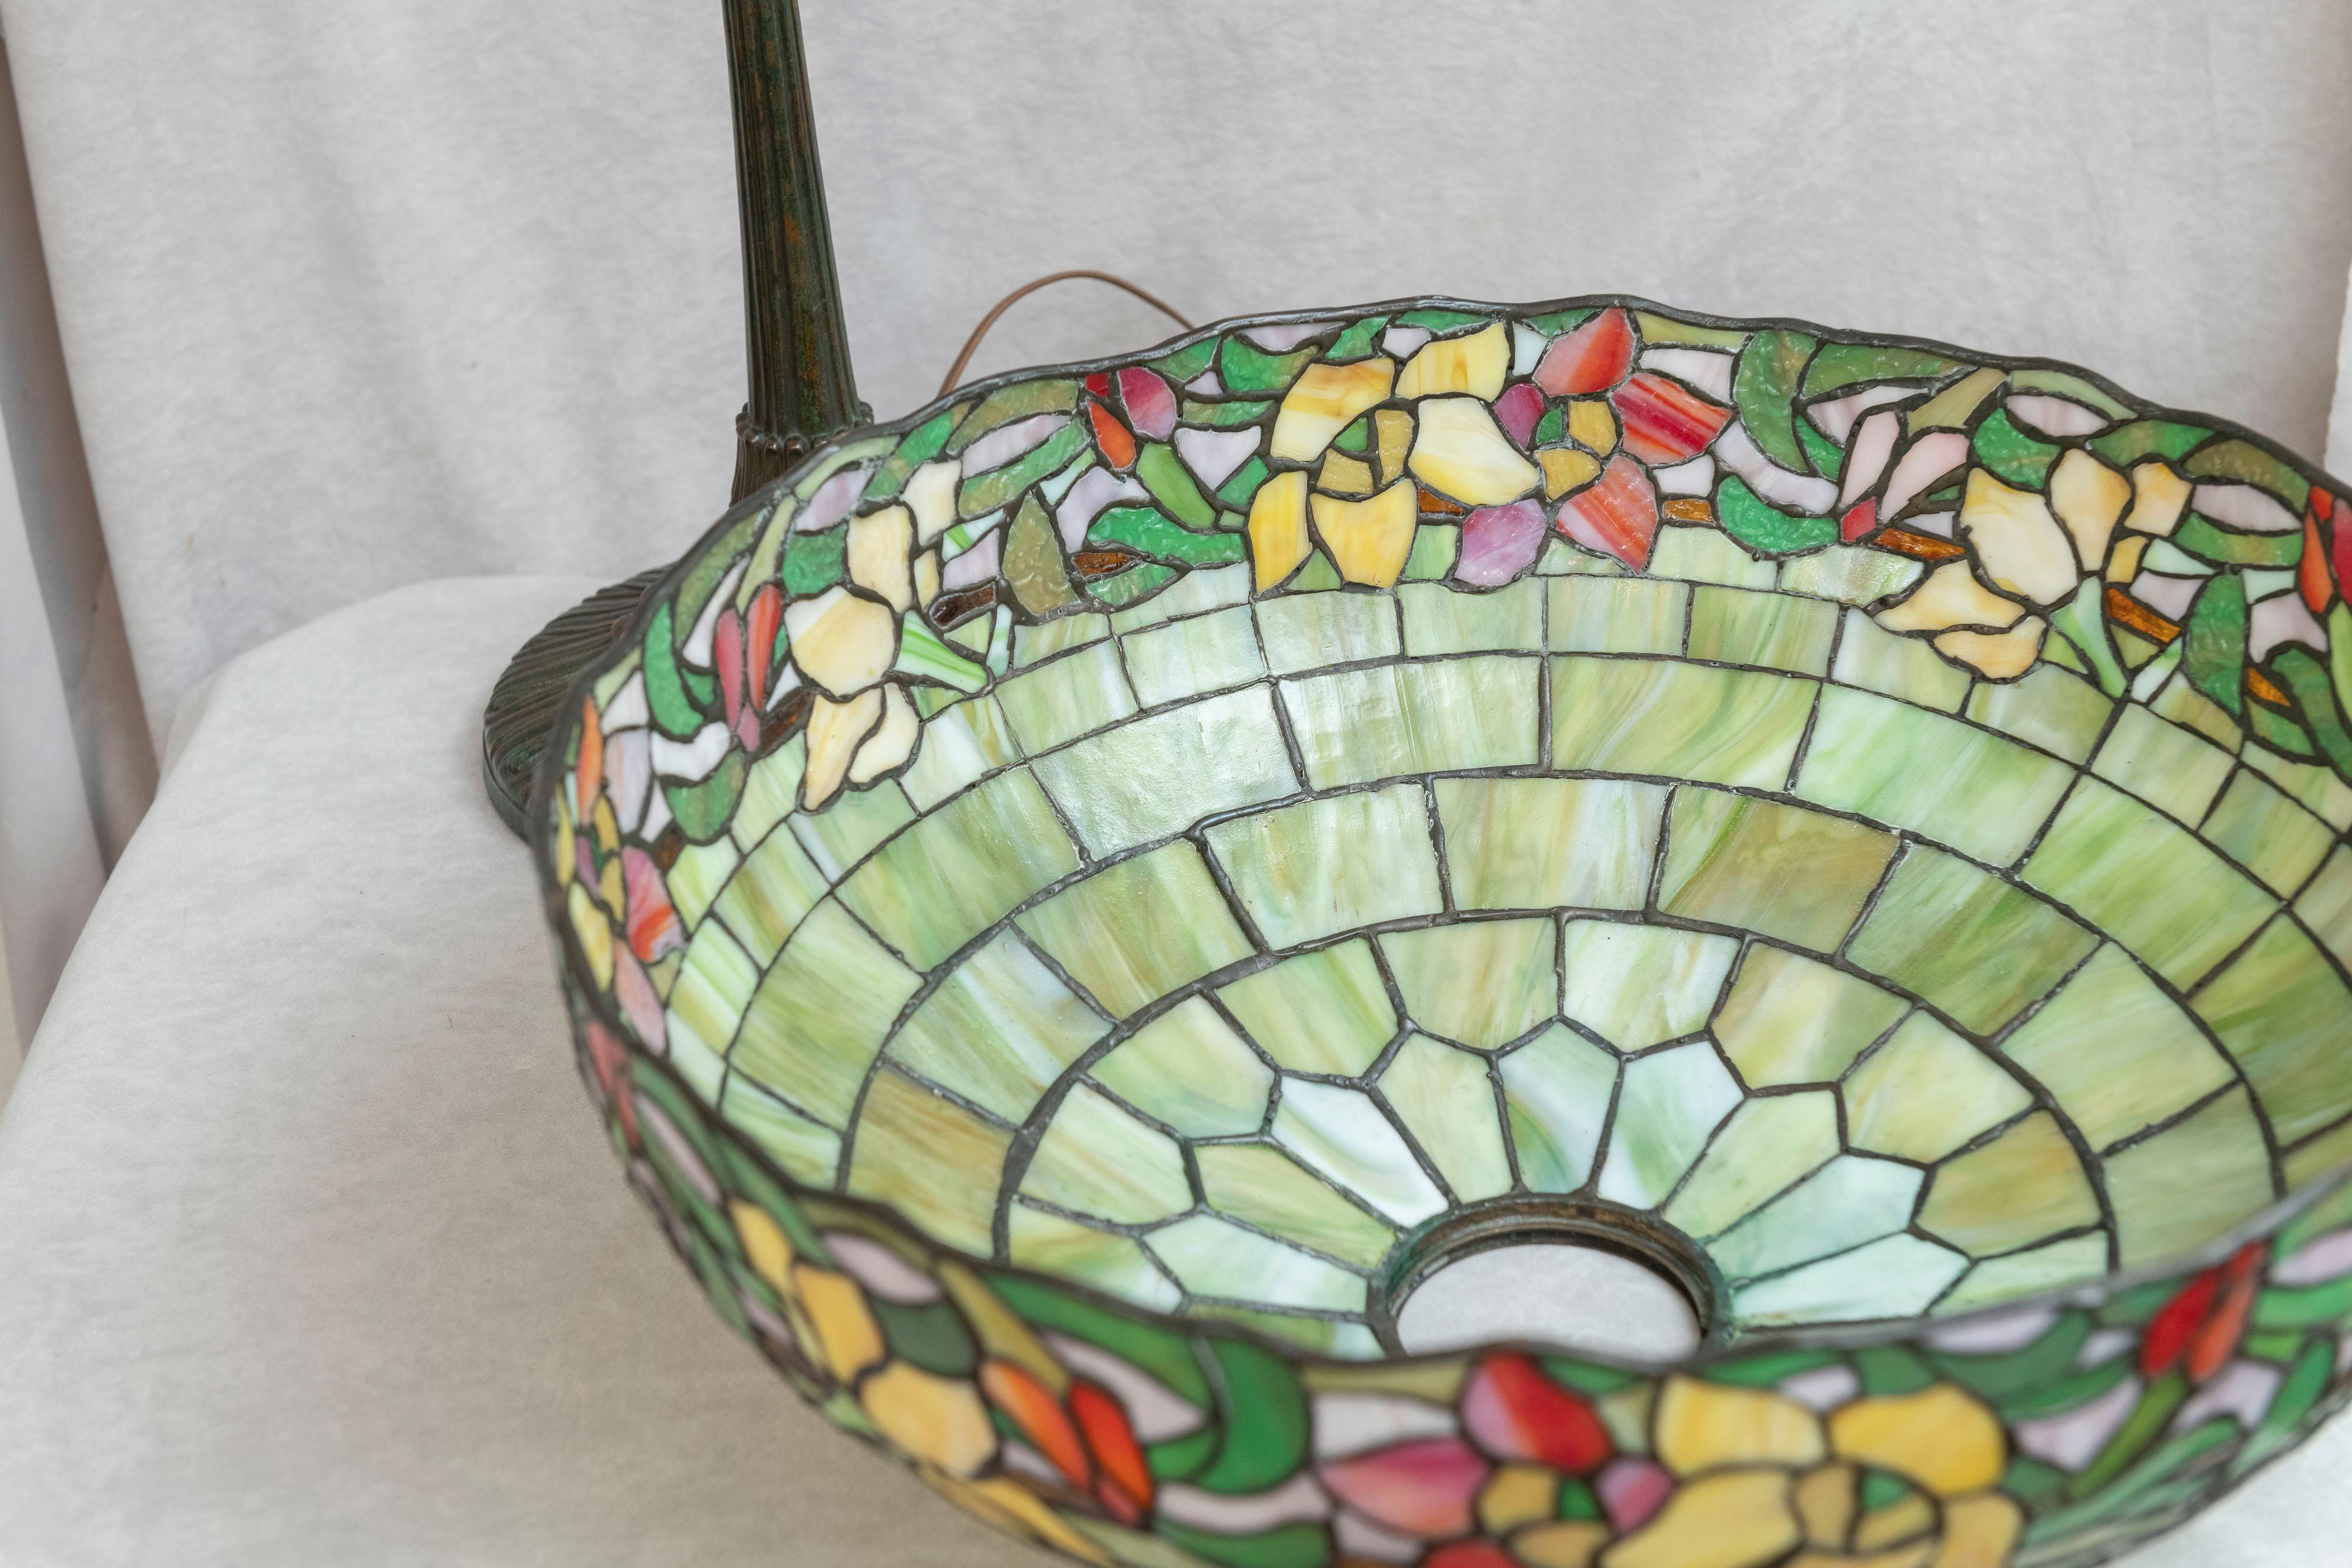 Hand-Crafted American Leaded Glass Table Lamp by Wilkinson, circa 1910